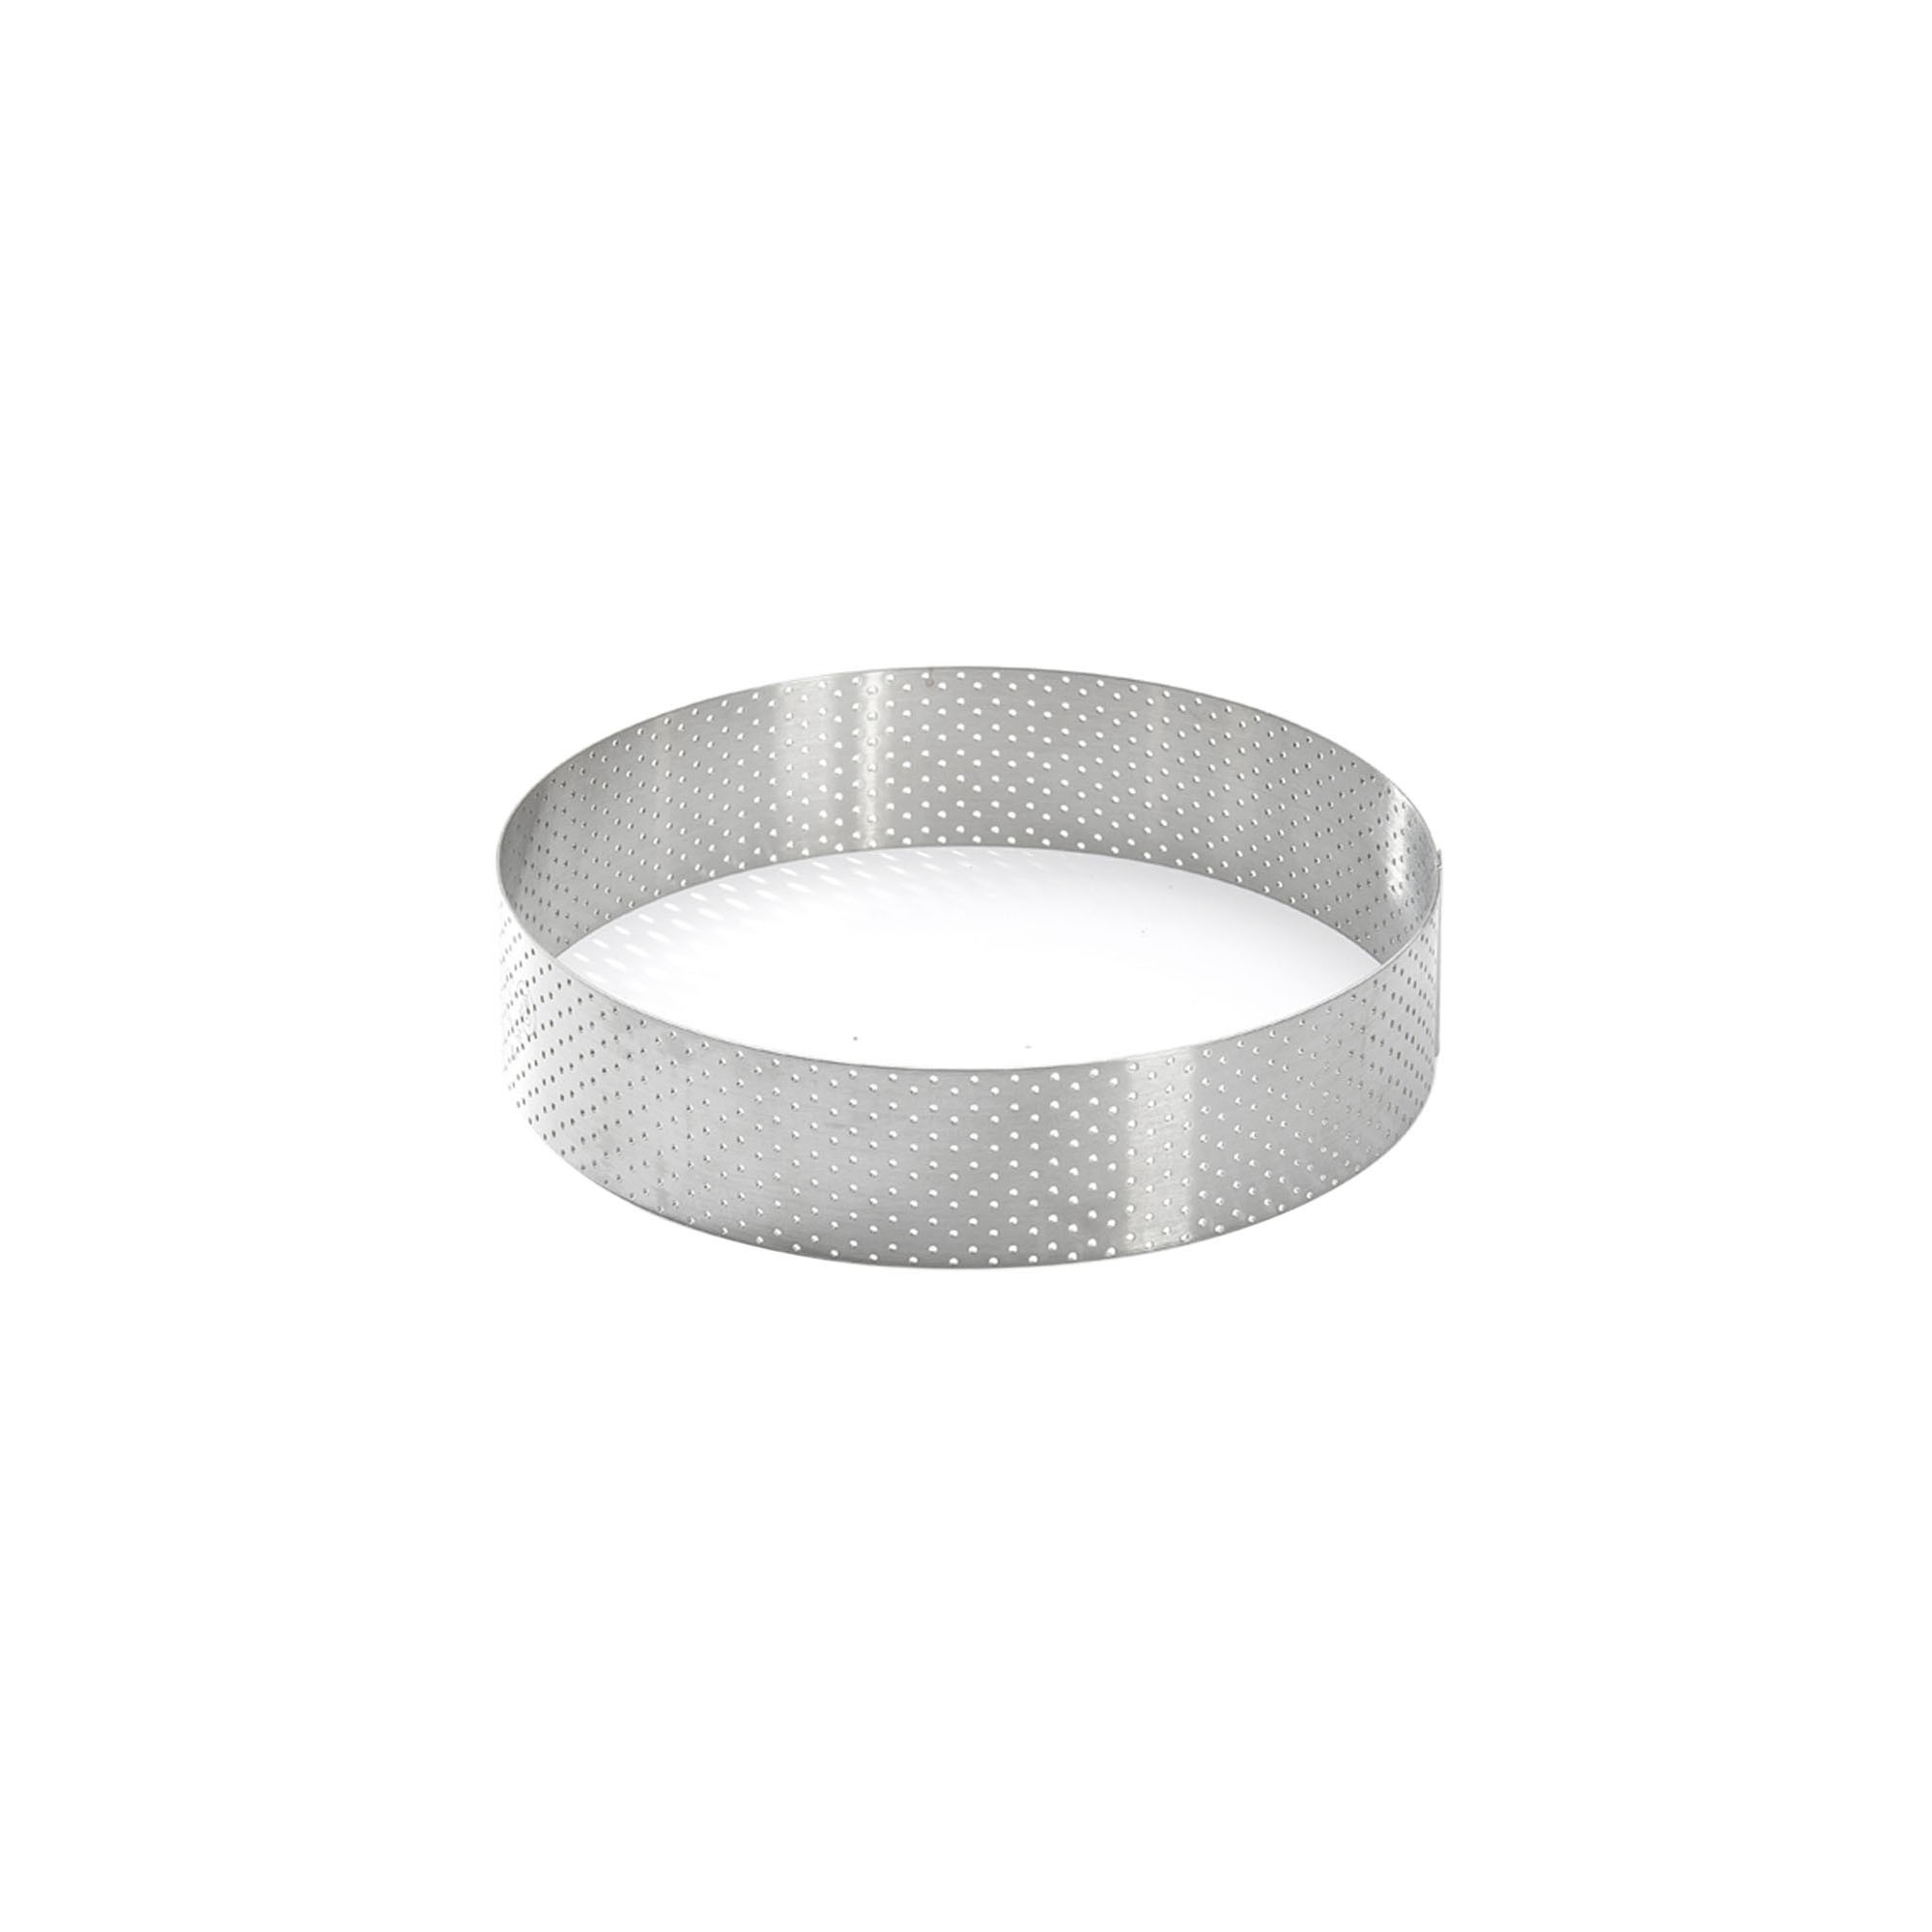 Perforated tart ring, stainless steel, 18.5 cm - de Buyer | KitchenShop